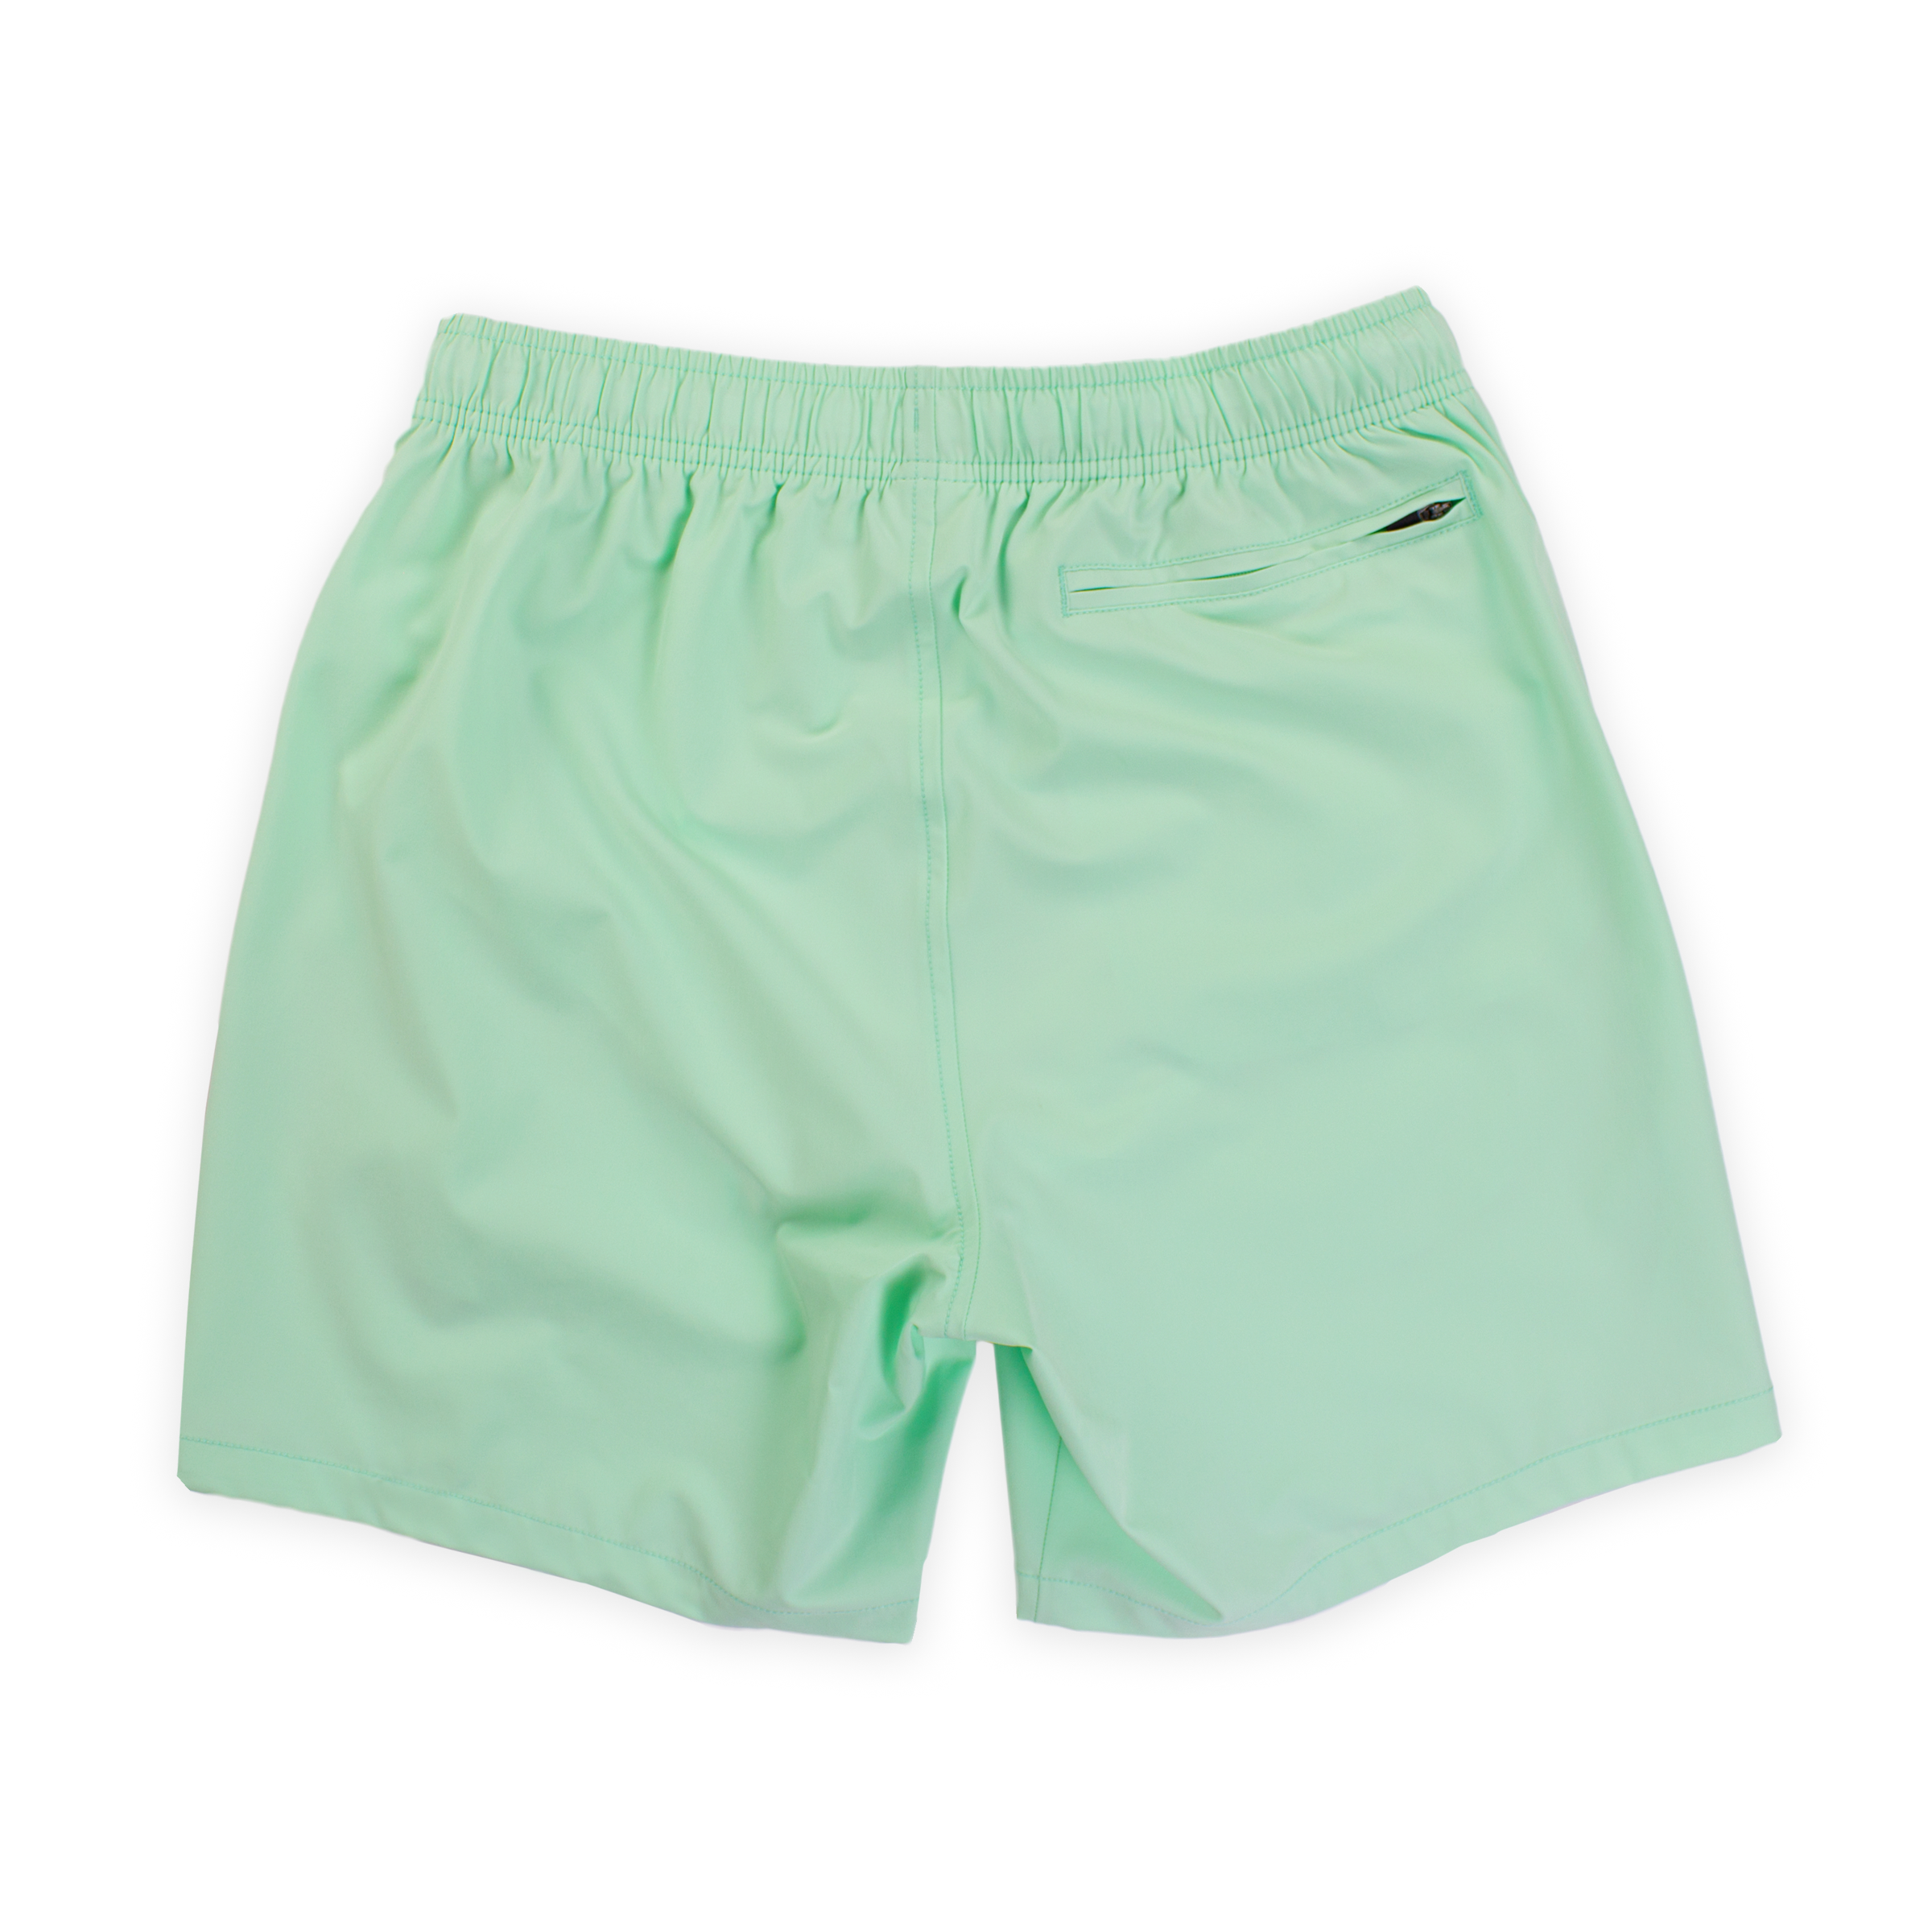 Stretch Swim 7" in Mint back with elastic waistband and back right zippered pocket